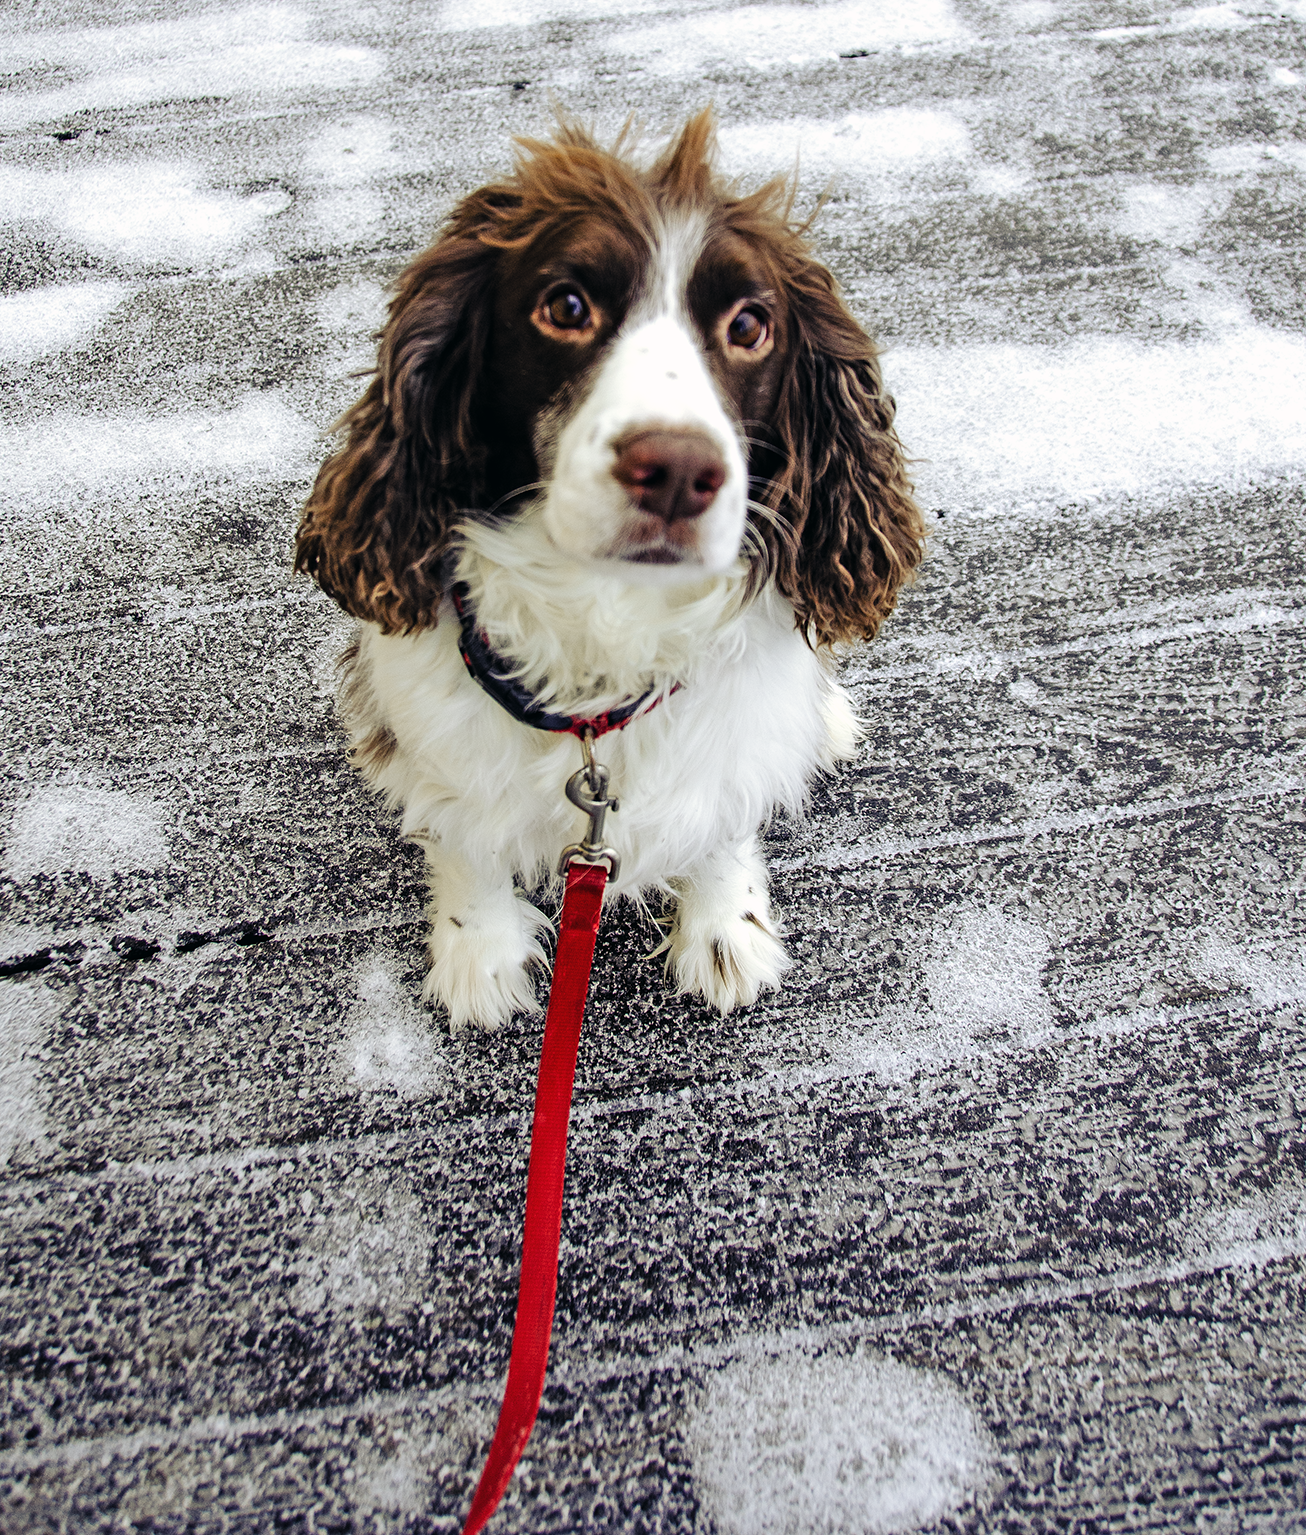 A brown and white dog sits on a boardwalk looking up at the camera. A red leash trails out of frame.